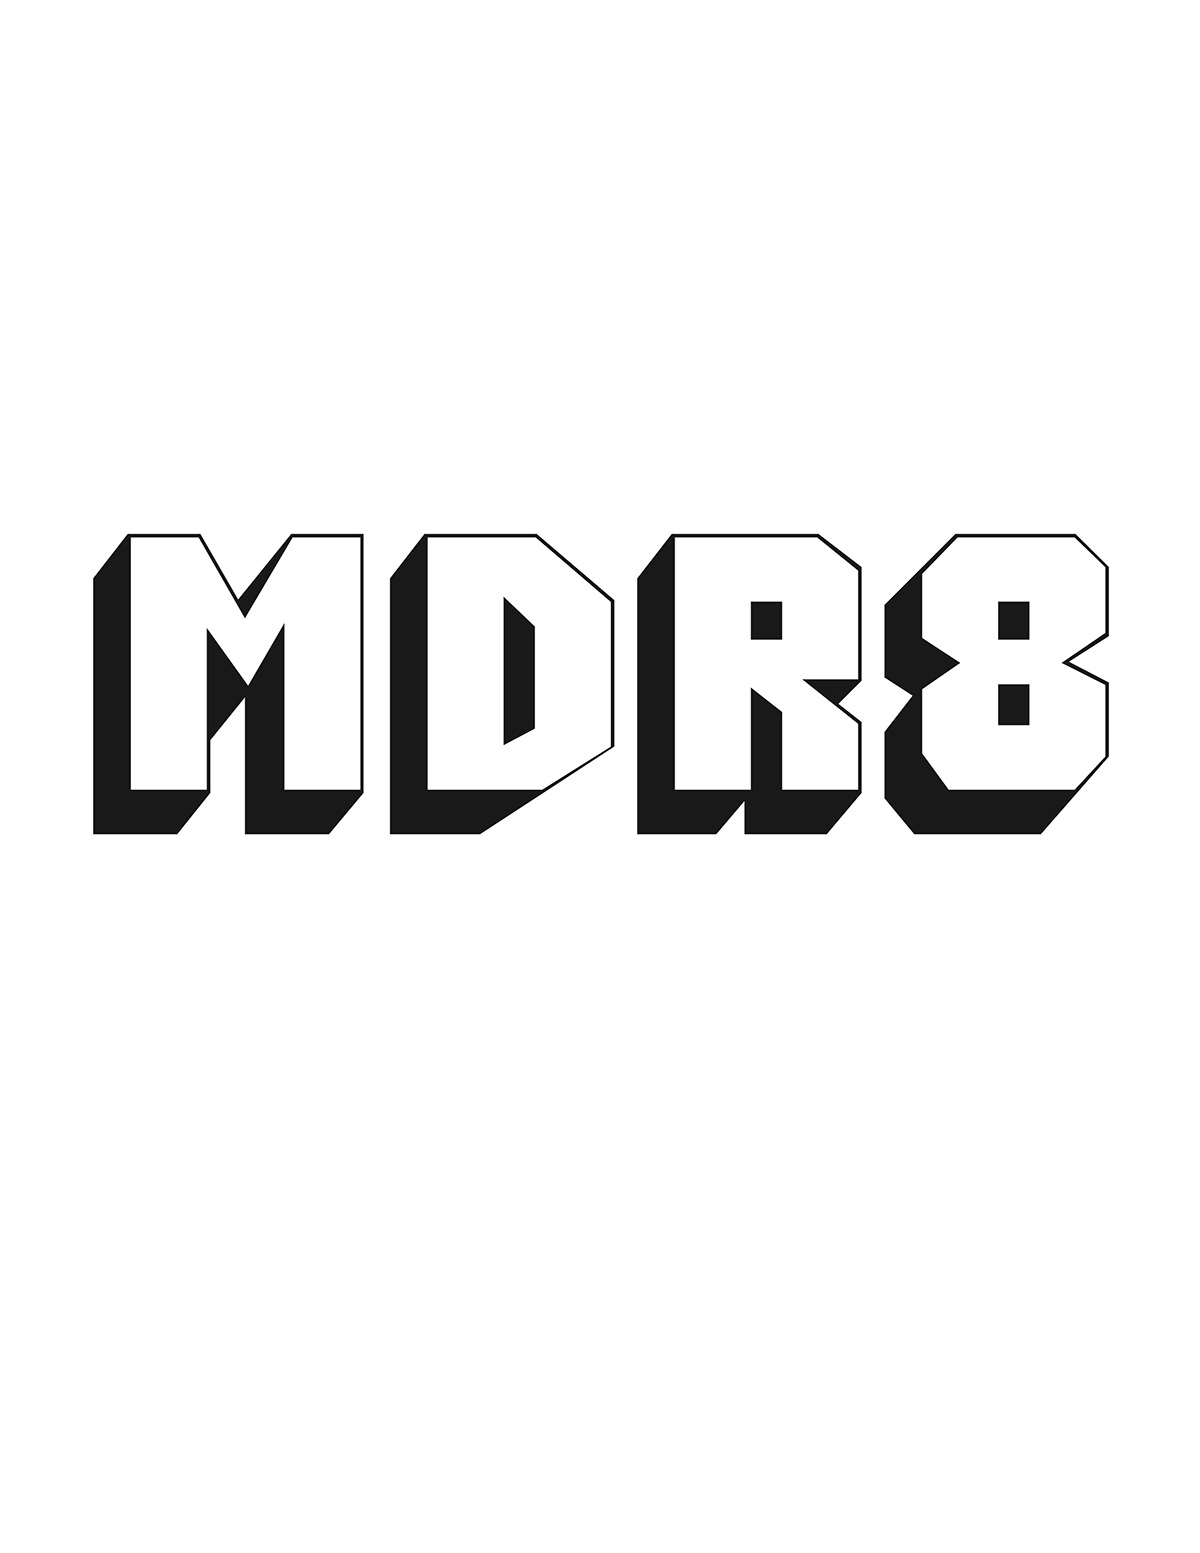 Midway Contemporary Art logo